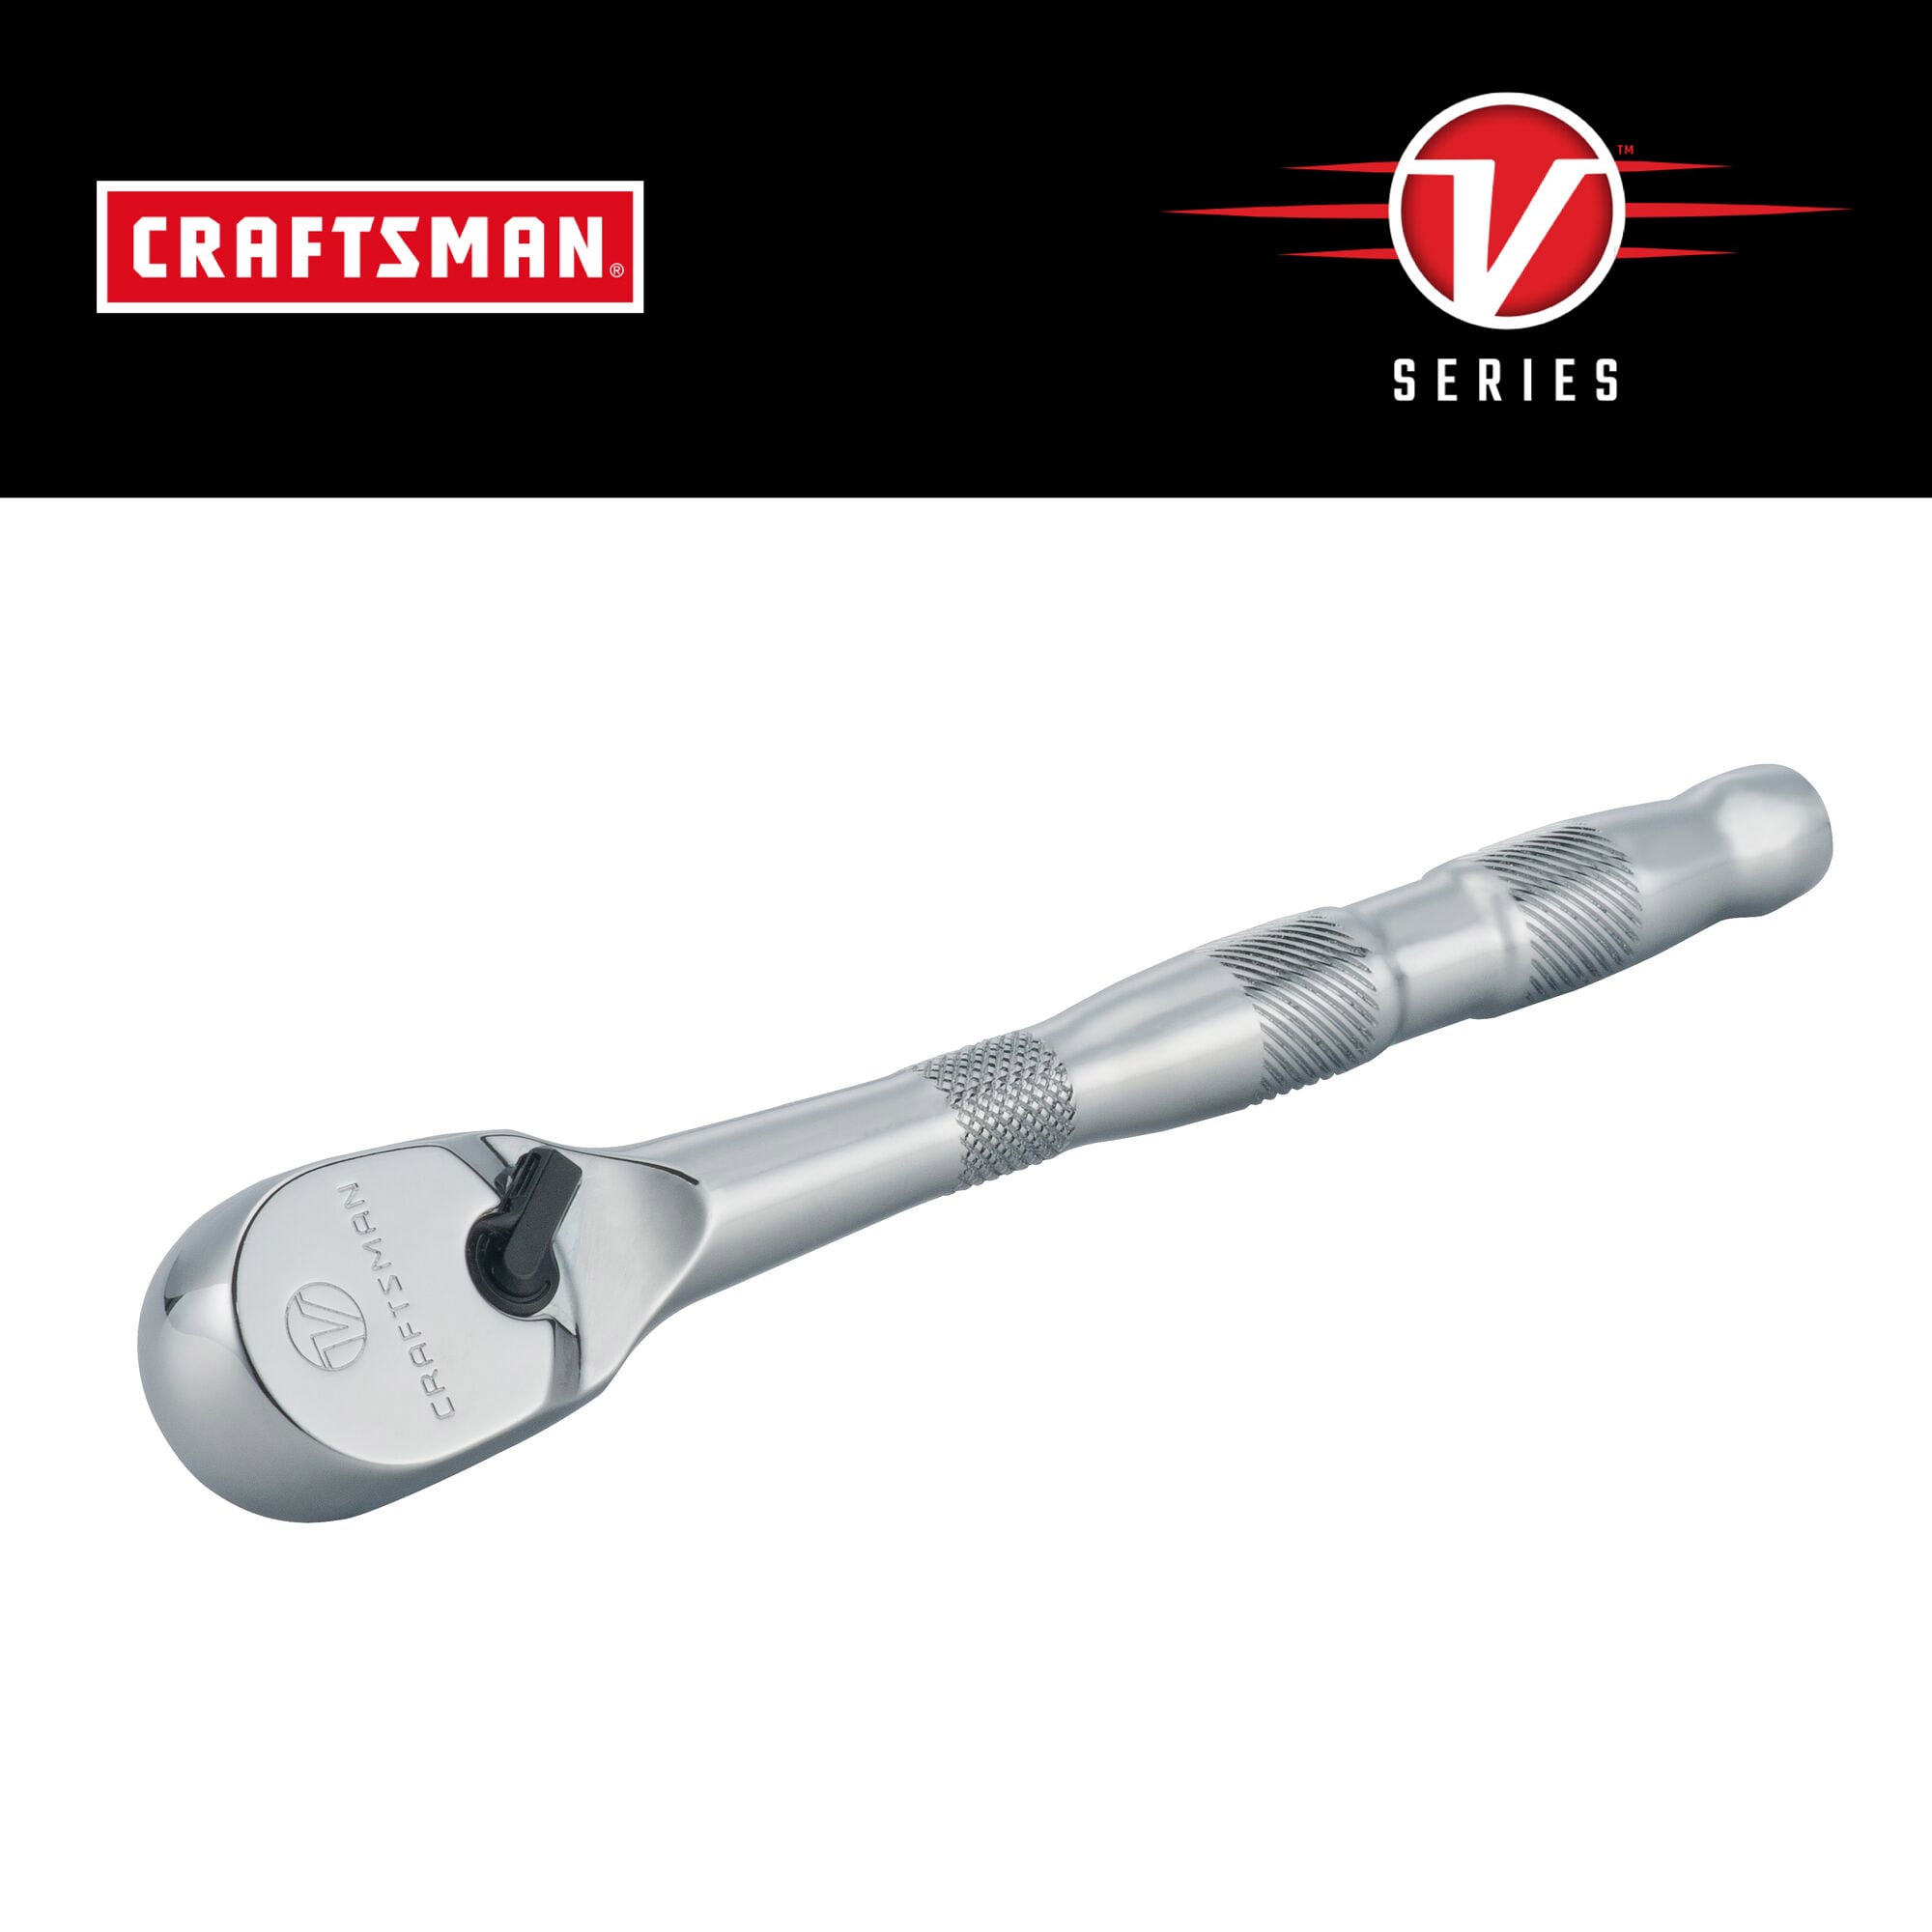 CRAFTSMAN V-Series 96-Tooth 3/8-in Drive Comfort Grip Handle